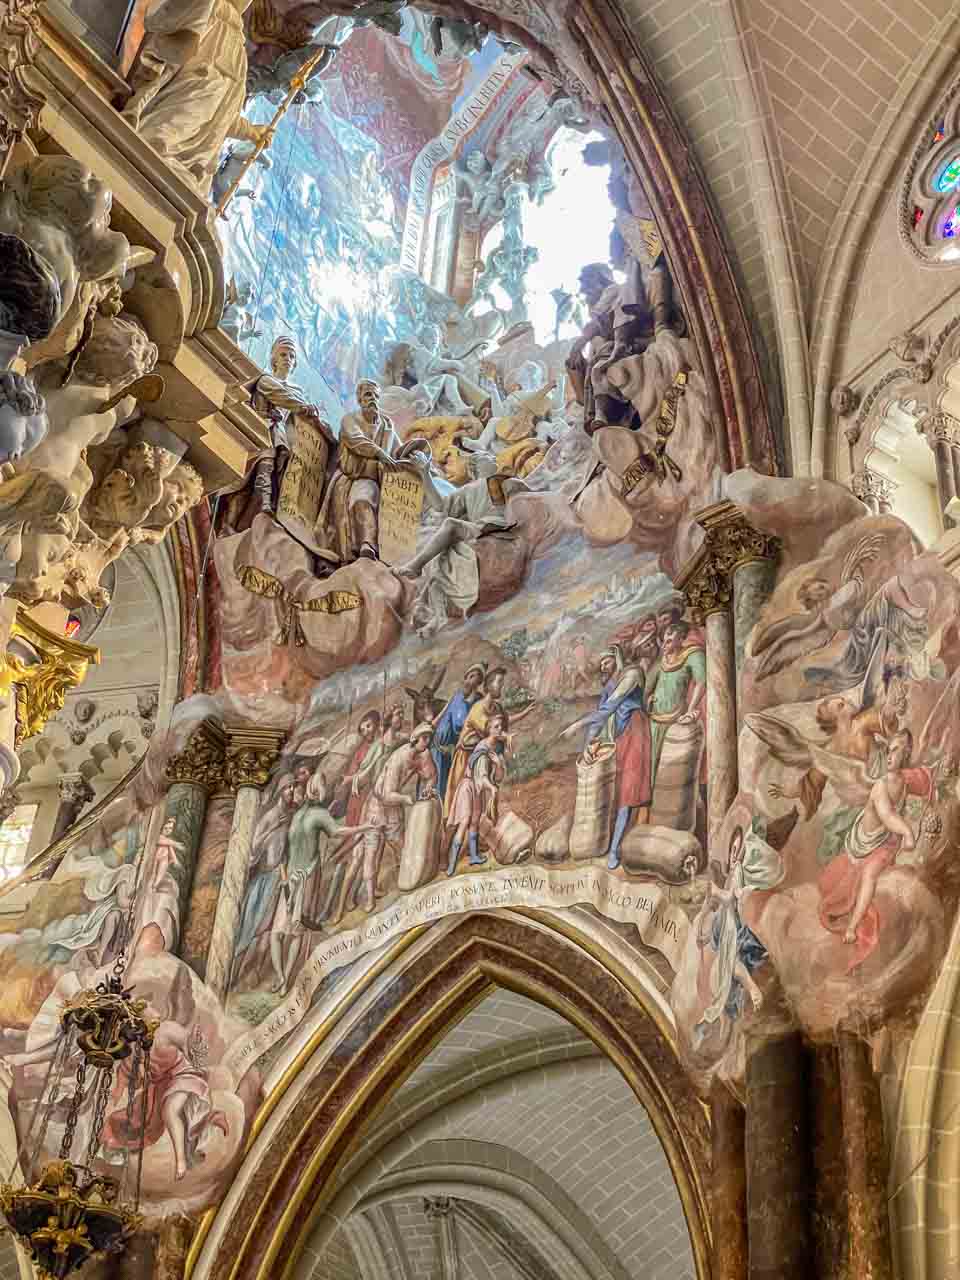 Religious frescos on the walls of a cathedral.